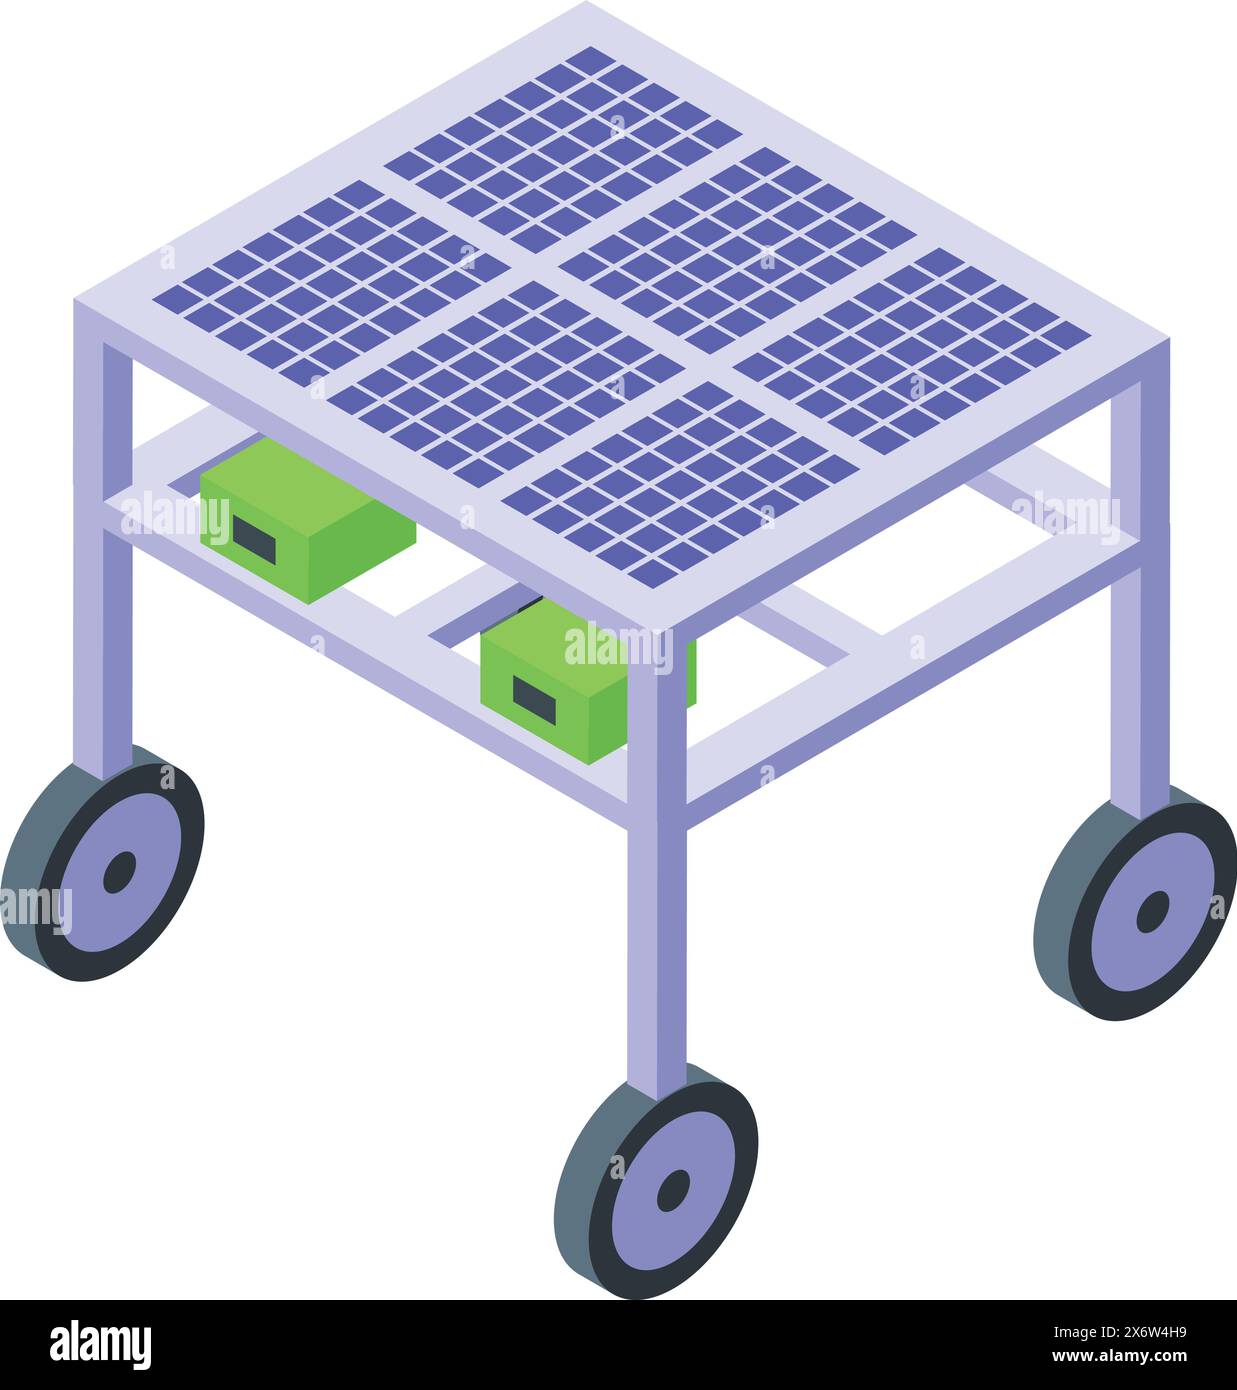 Digital illustration of a cart equipped with solar panels and wheels in isometric view Stock Vector